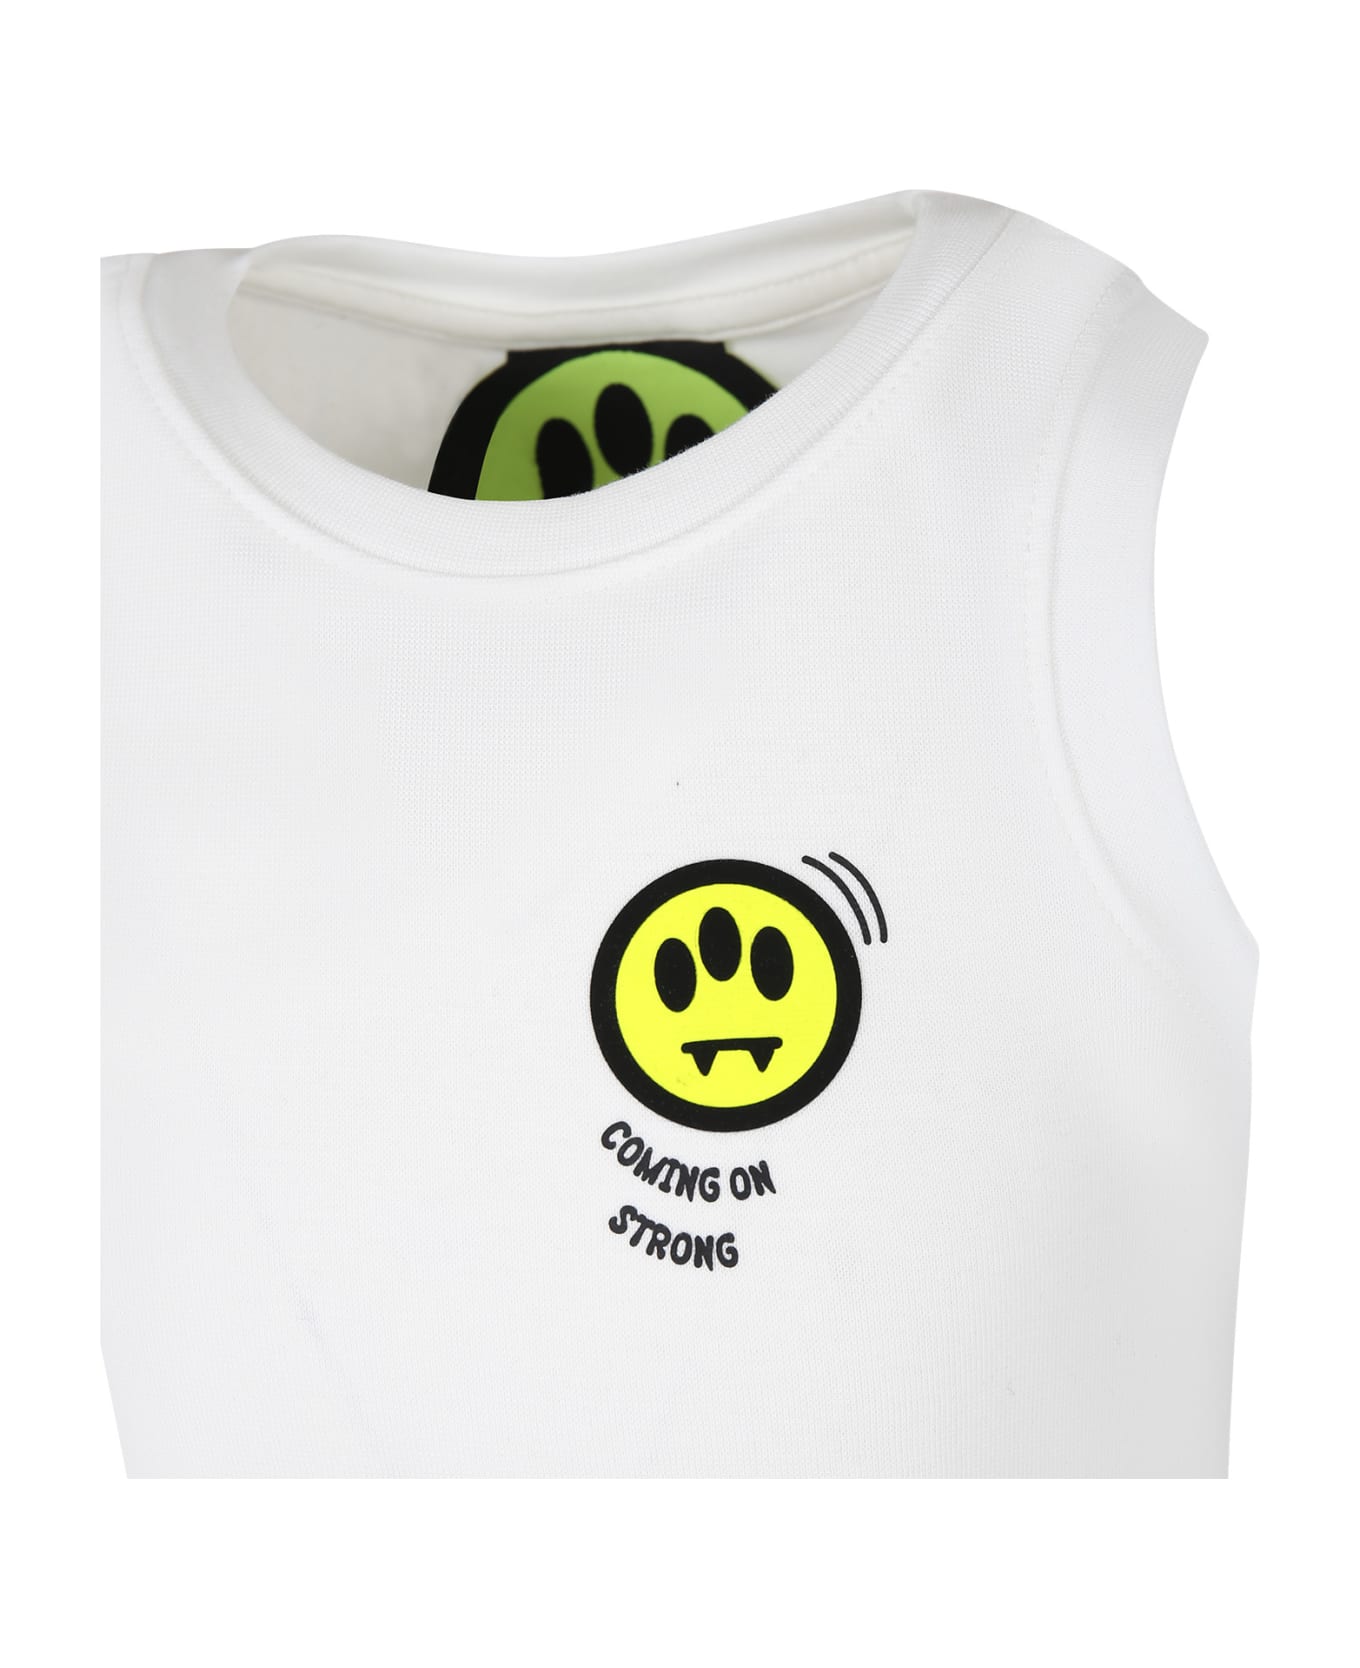 Barrow White Tank Top For Girl With Logo - White Tシャツ＆ポロシャツ